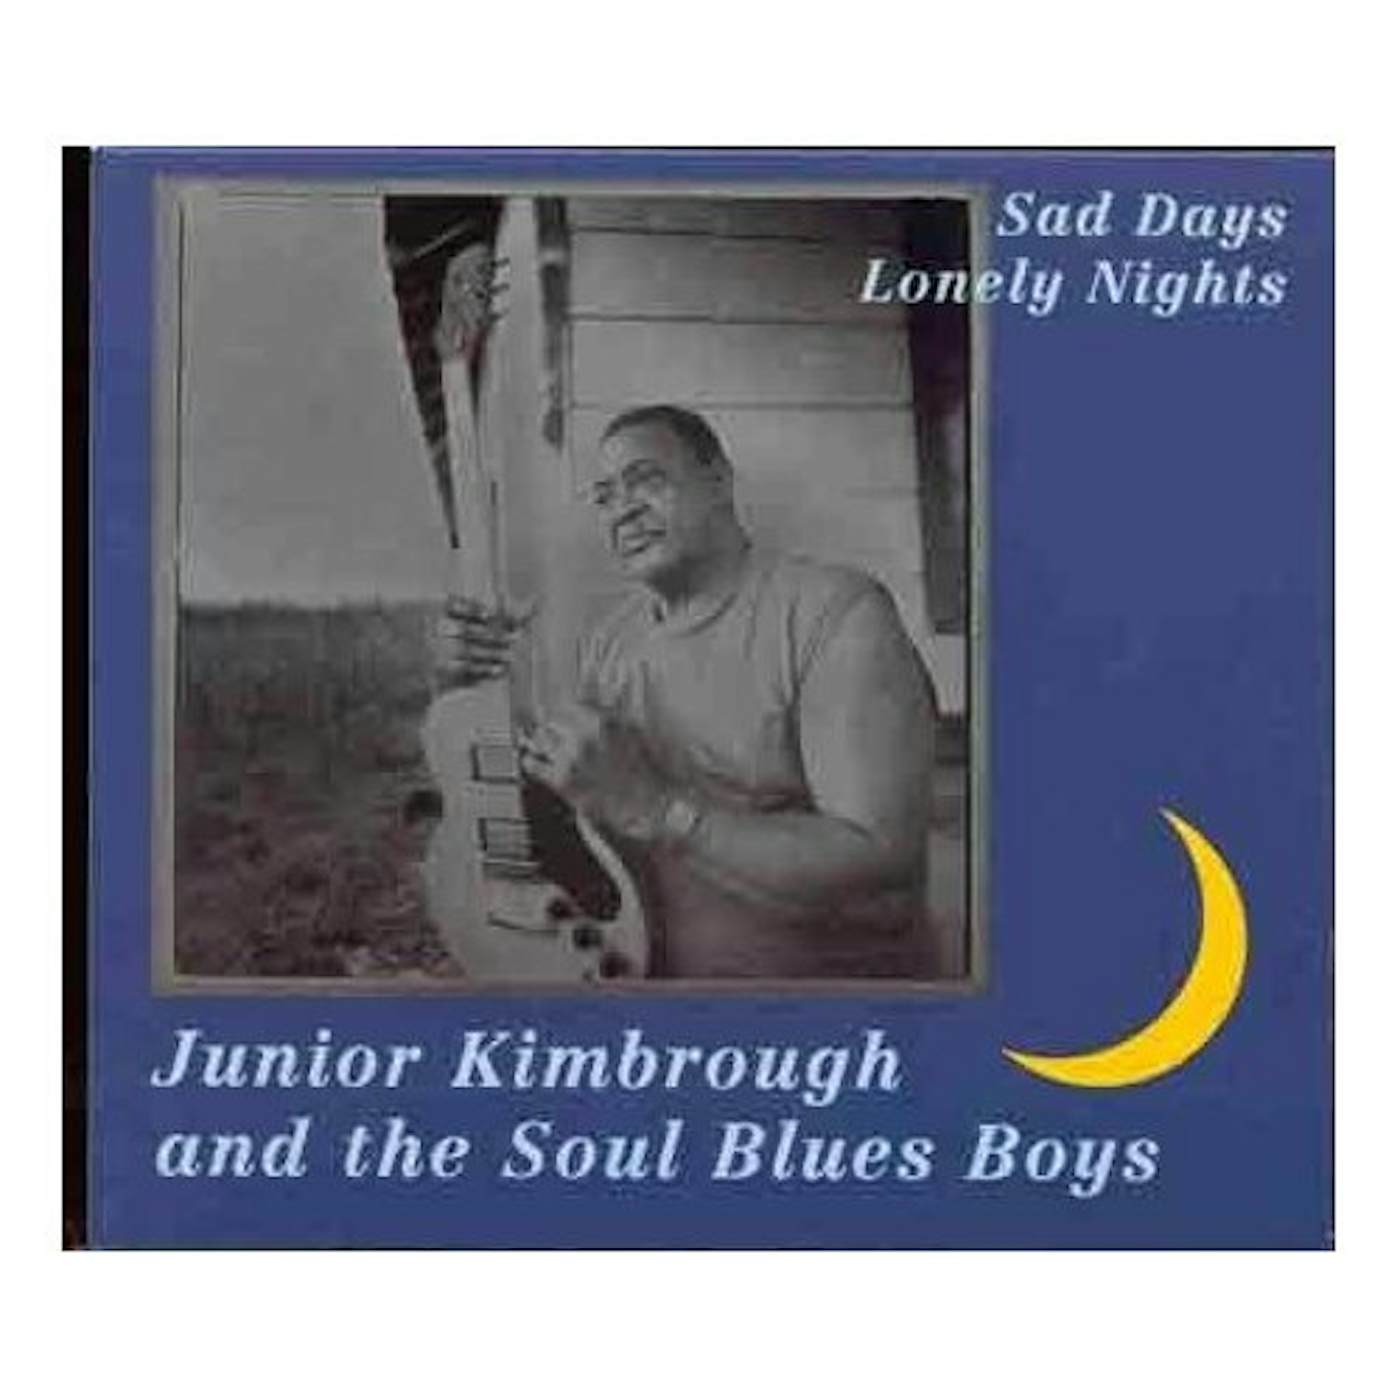 Junior Kimbrough and the Soul Blues Boys Sad Days Lonely Nights Vinyl Record